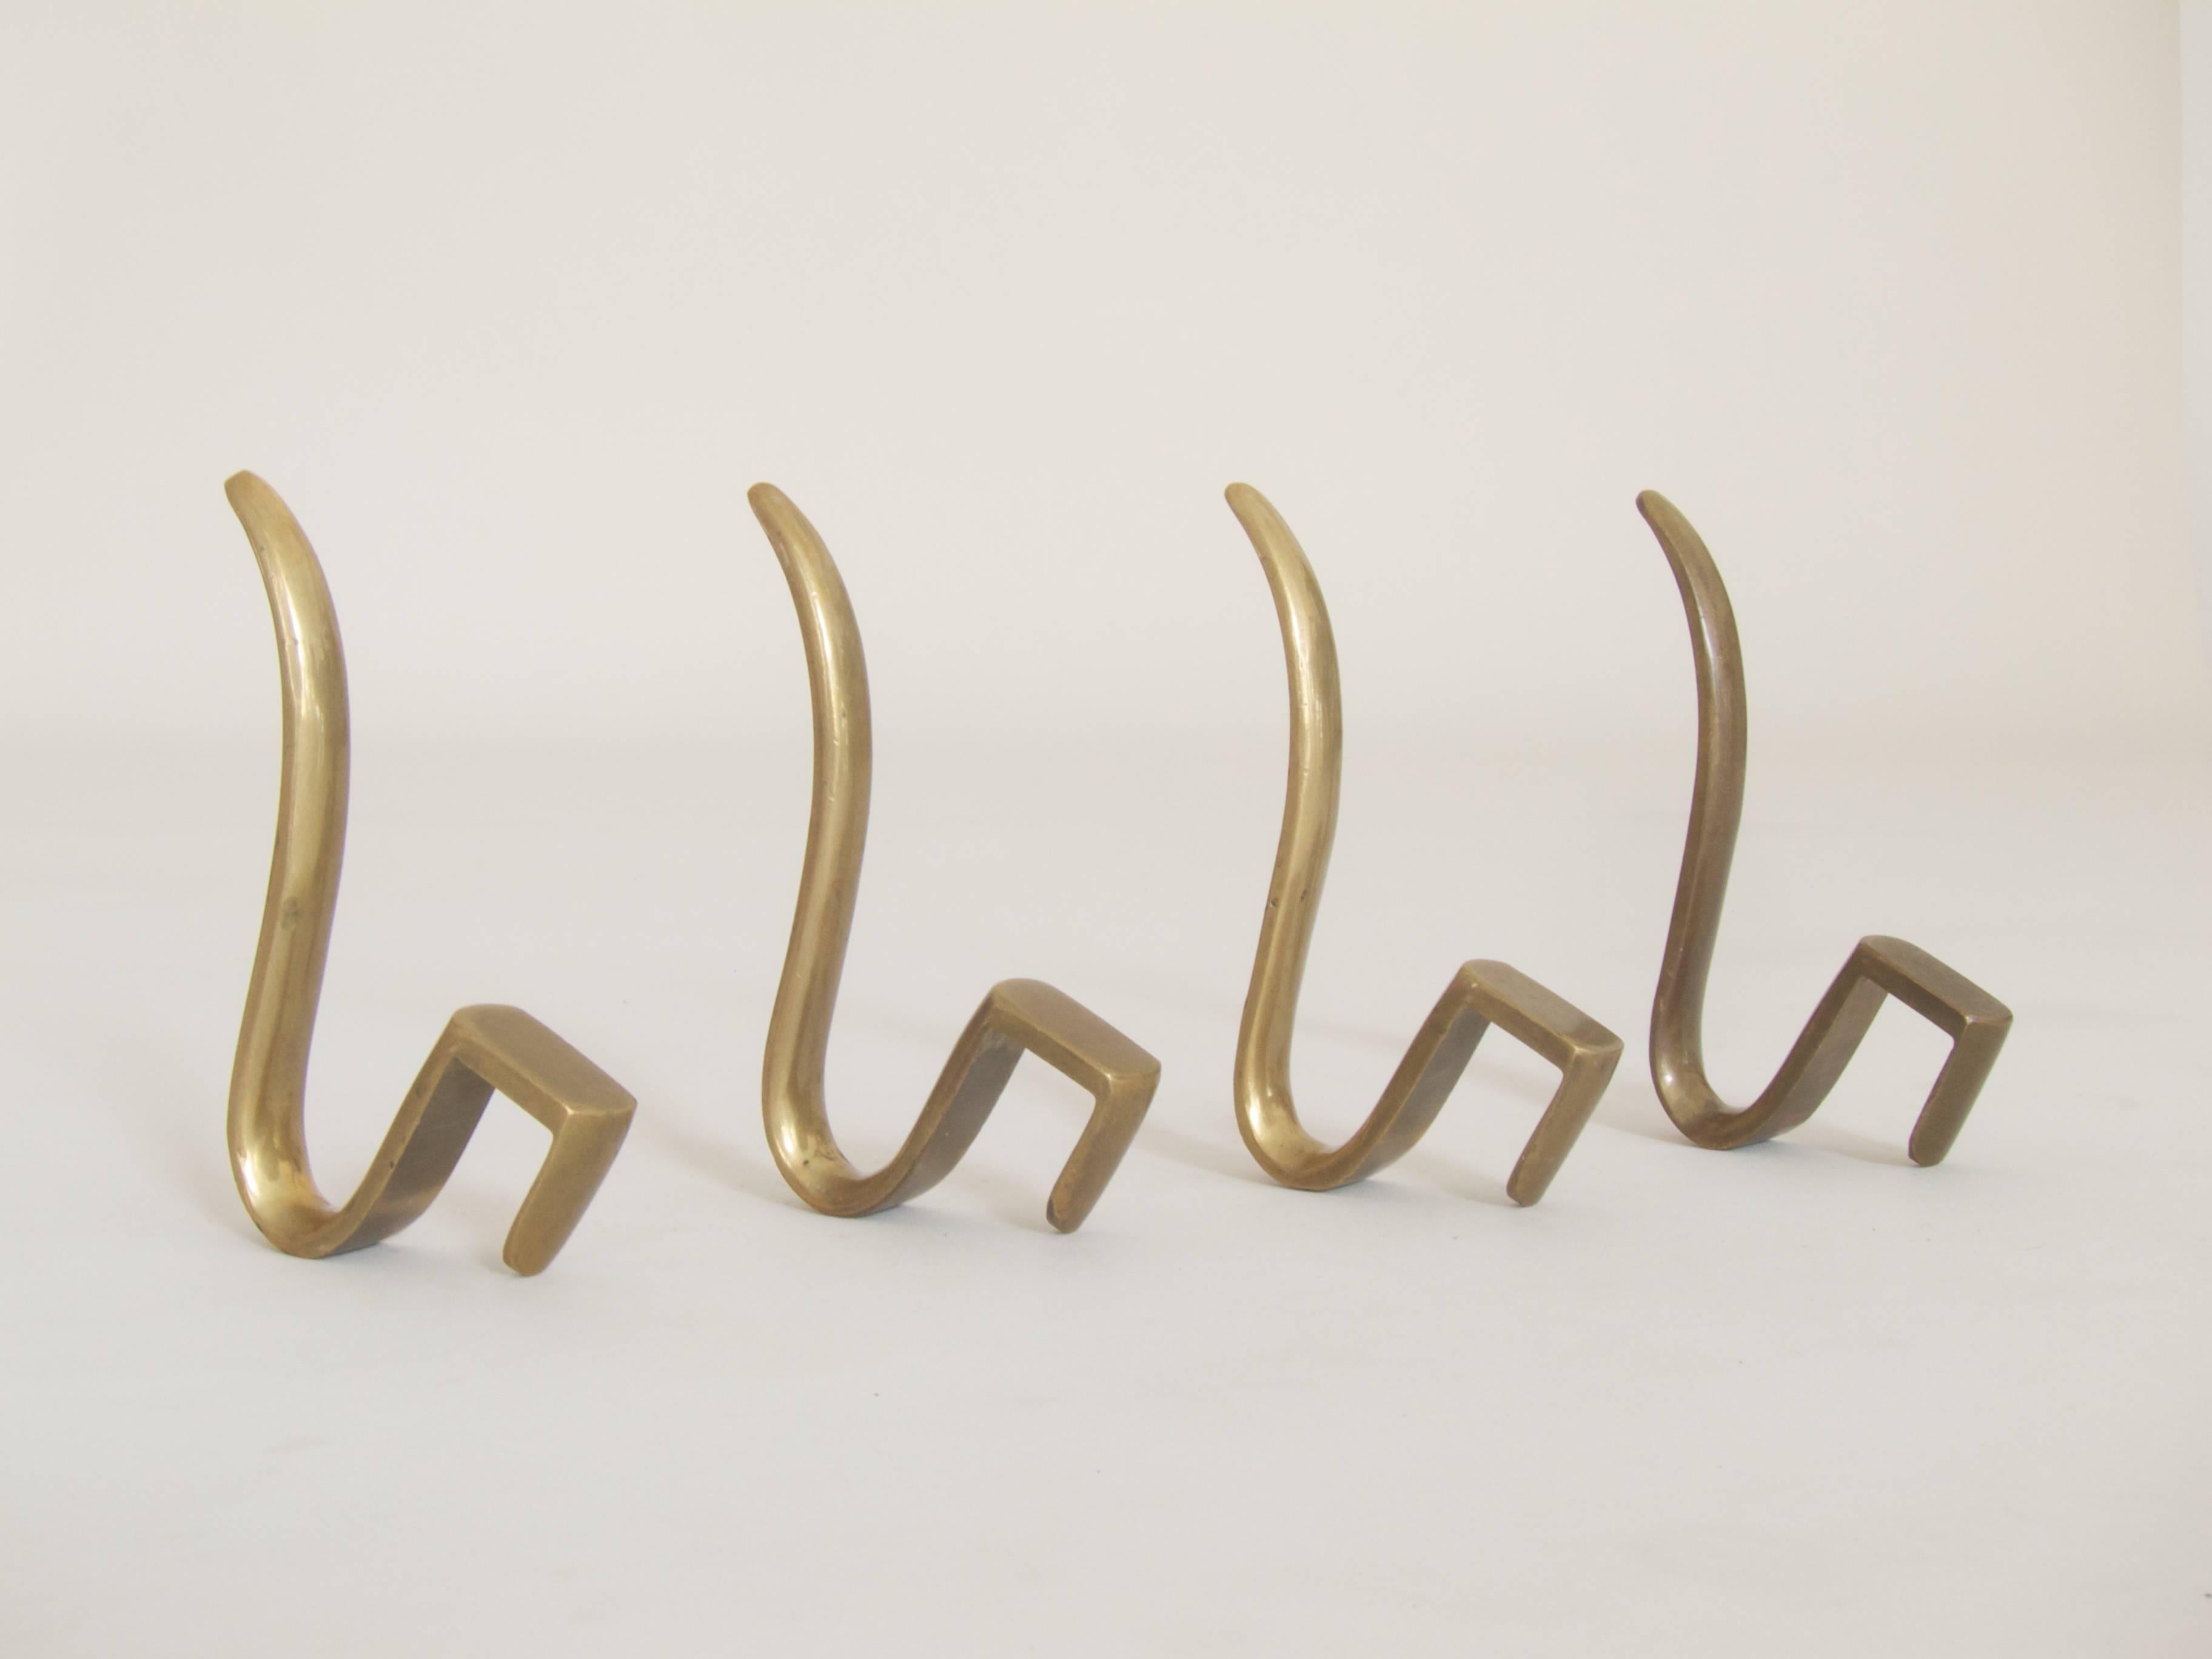 4 Brass Hooks by Carl Aubock

Additional hooks for the Carl Auböck coat rack.

Nice Patina!